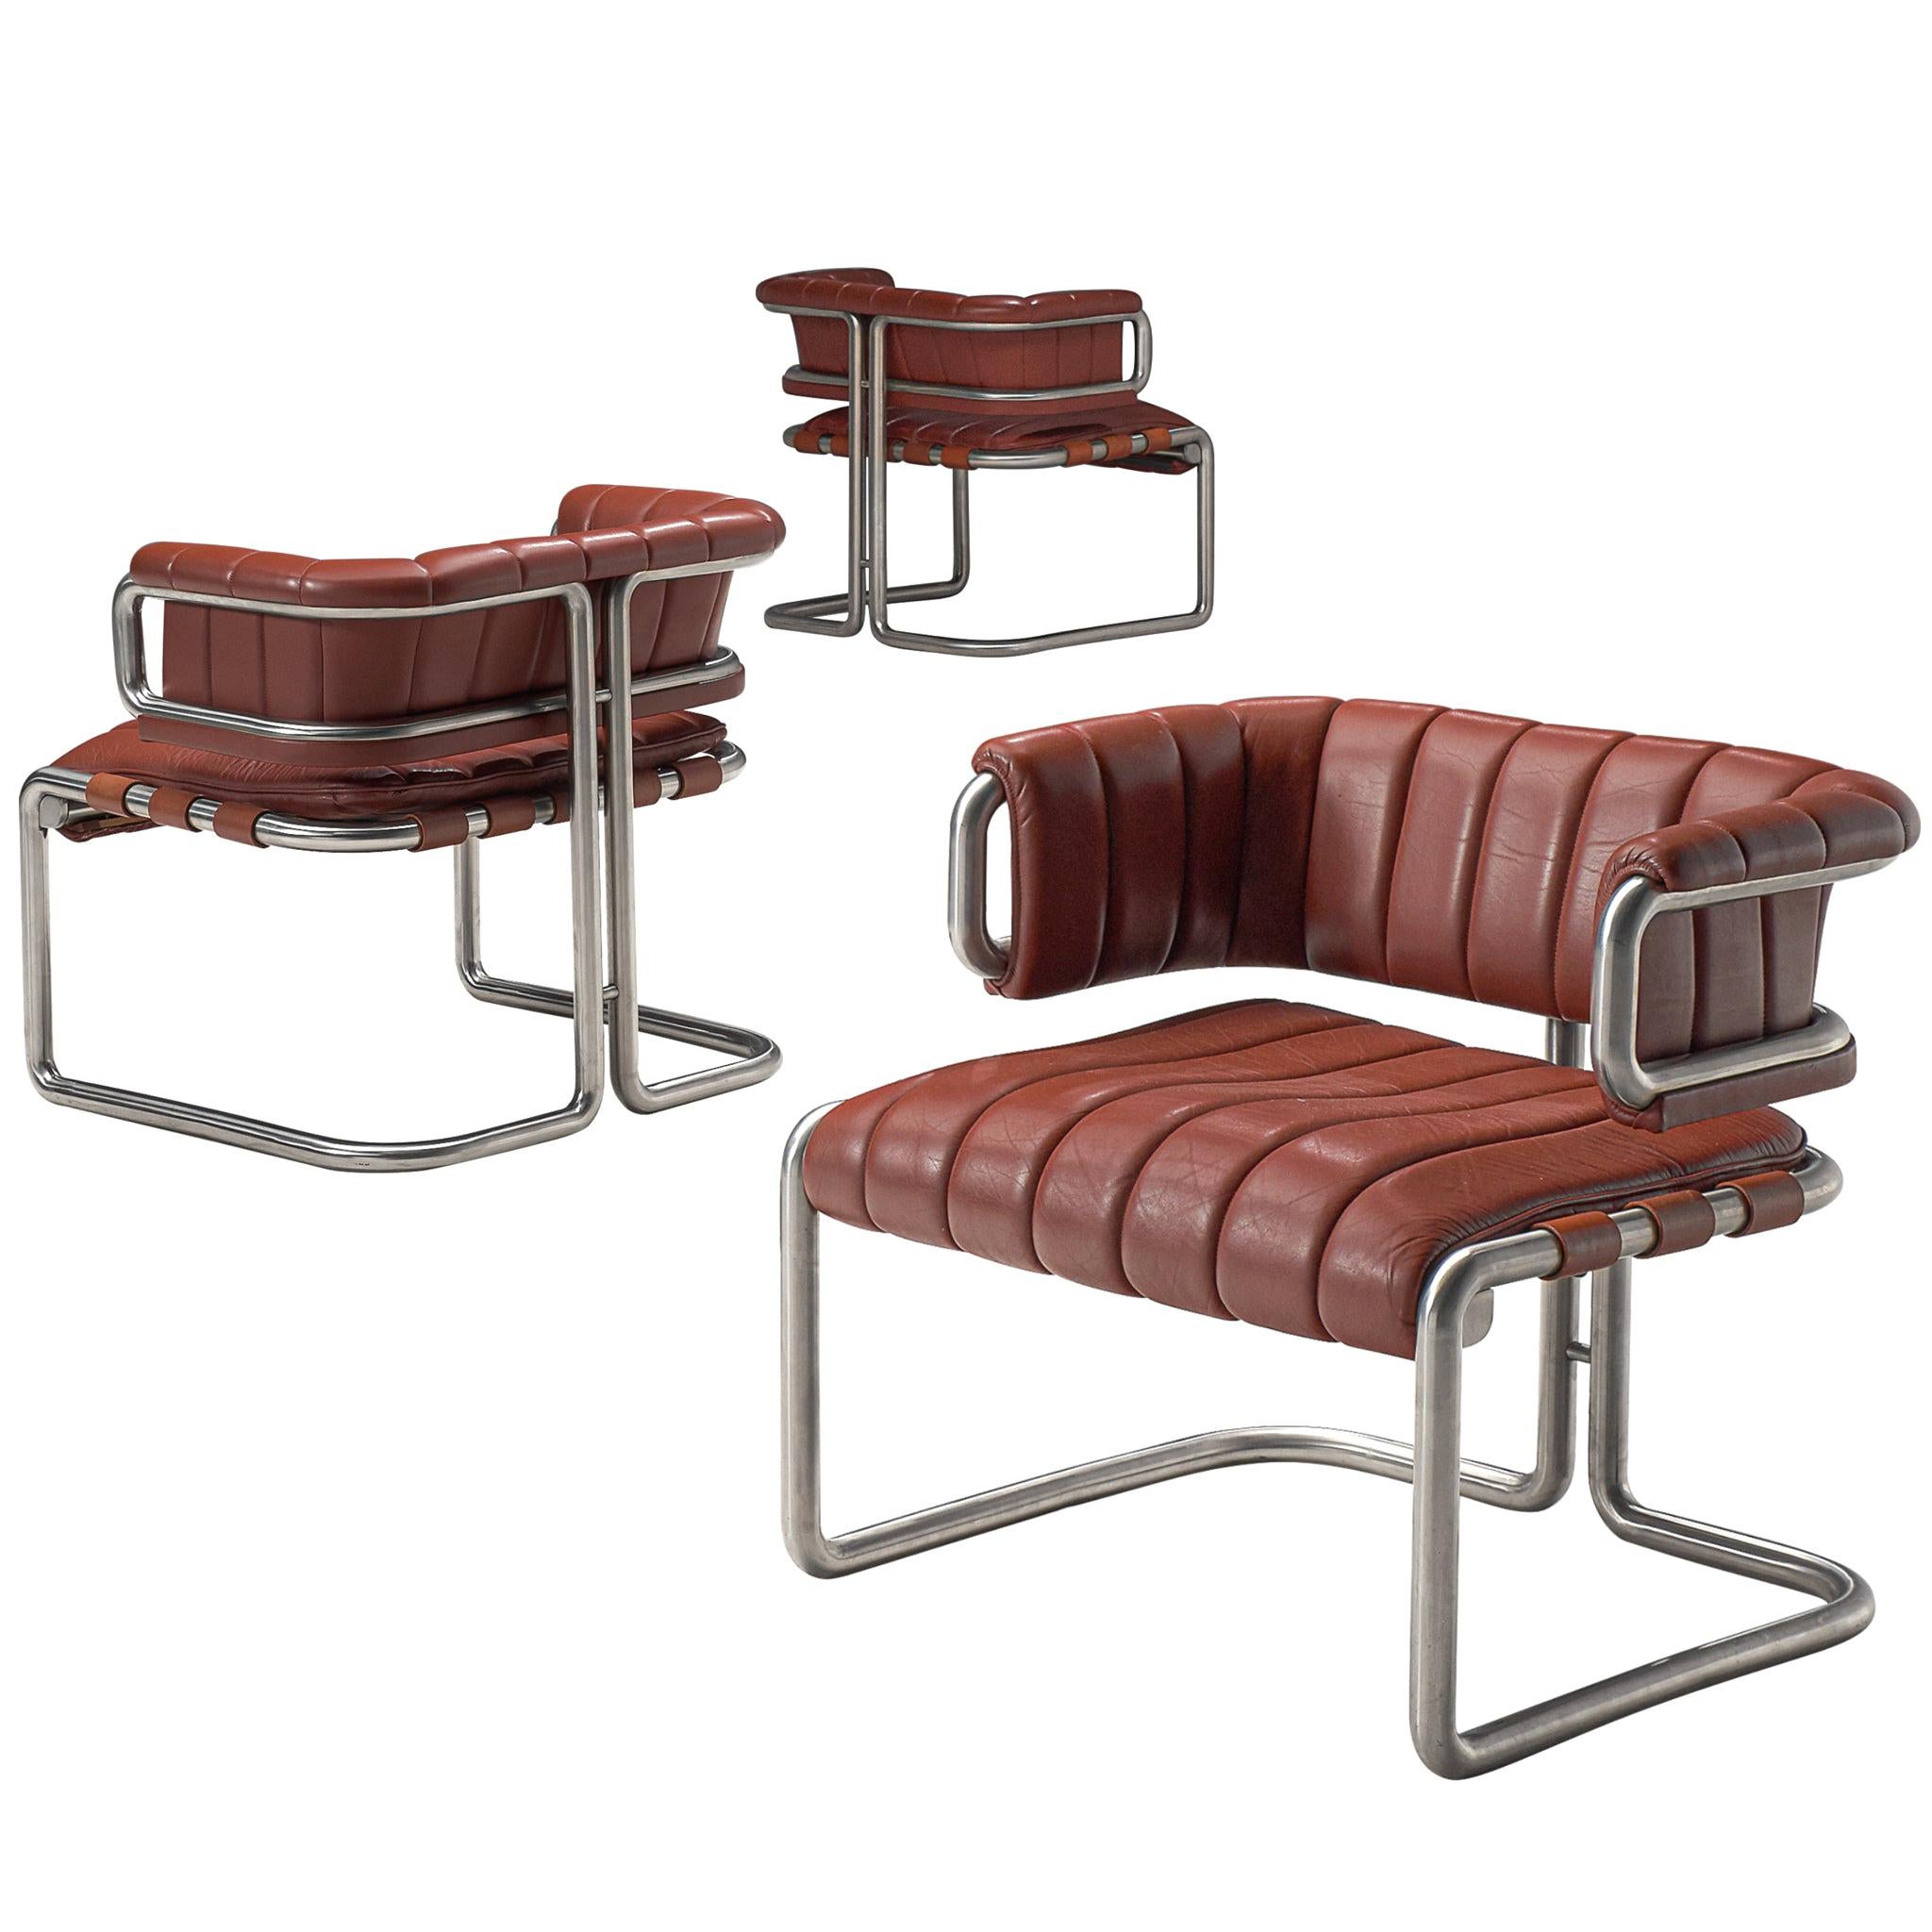 Set of Three Cubist Tubular Lounge Chairs in Red Leather